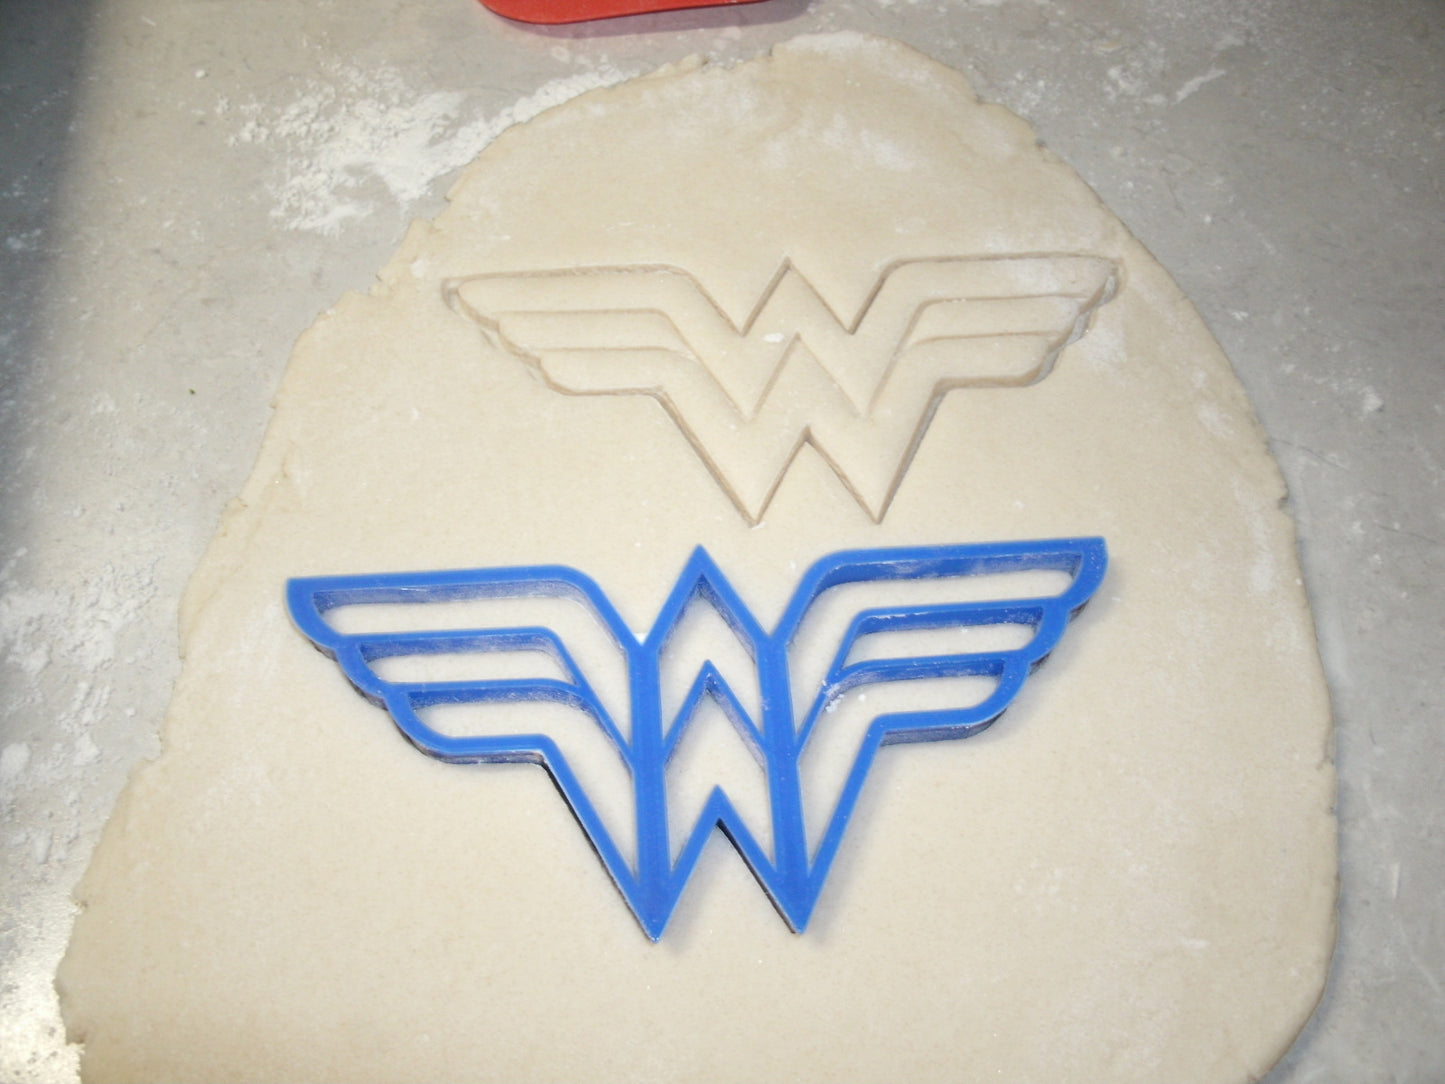 Cancer Survivors Are Superheroes Wonder Woman Set Of 3 Cookie Cutters USA PR1021